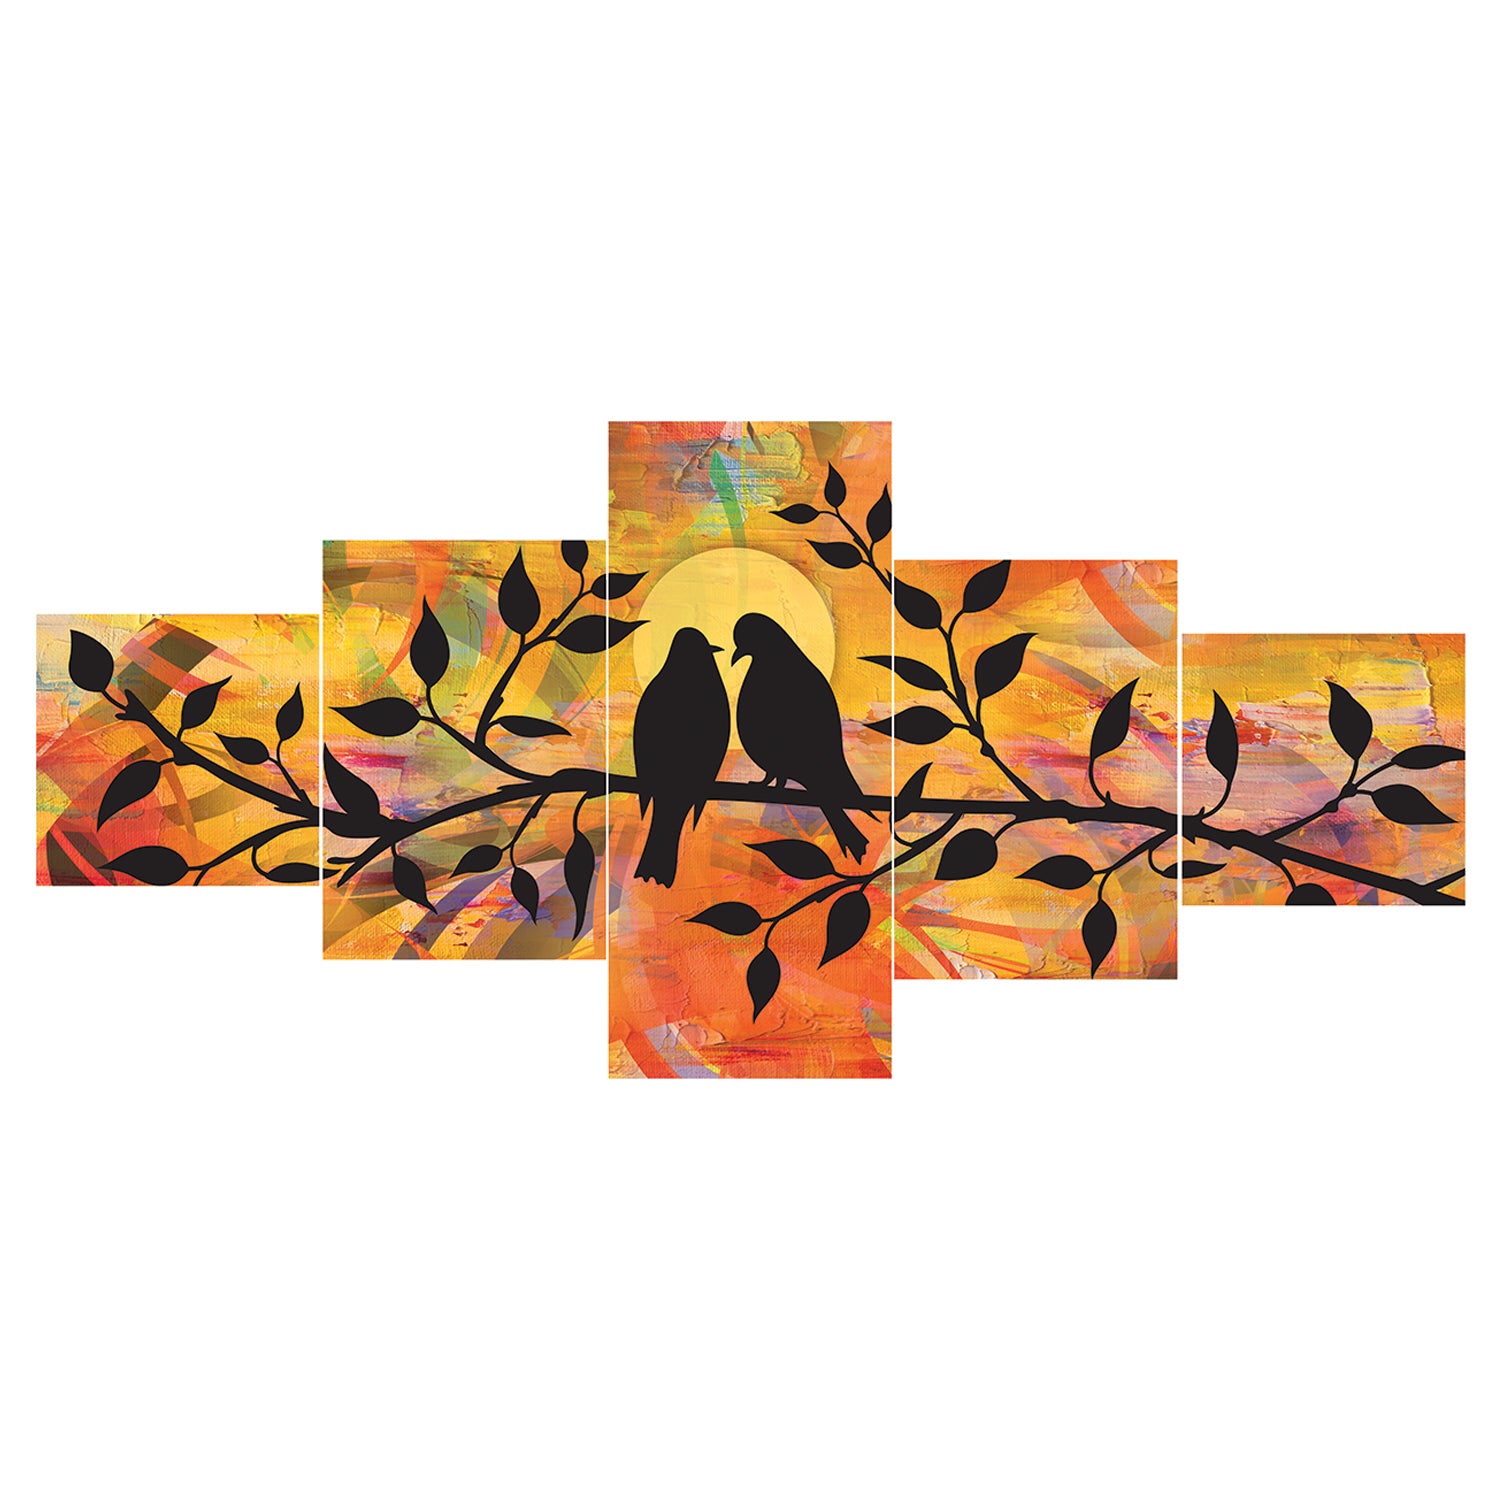 Set of 5 Birds Couple Sitting on Tree Branch Premium Sunboard Panels Painting